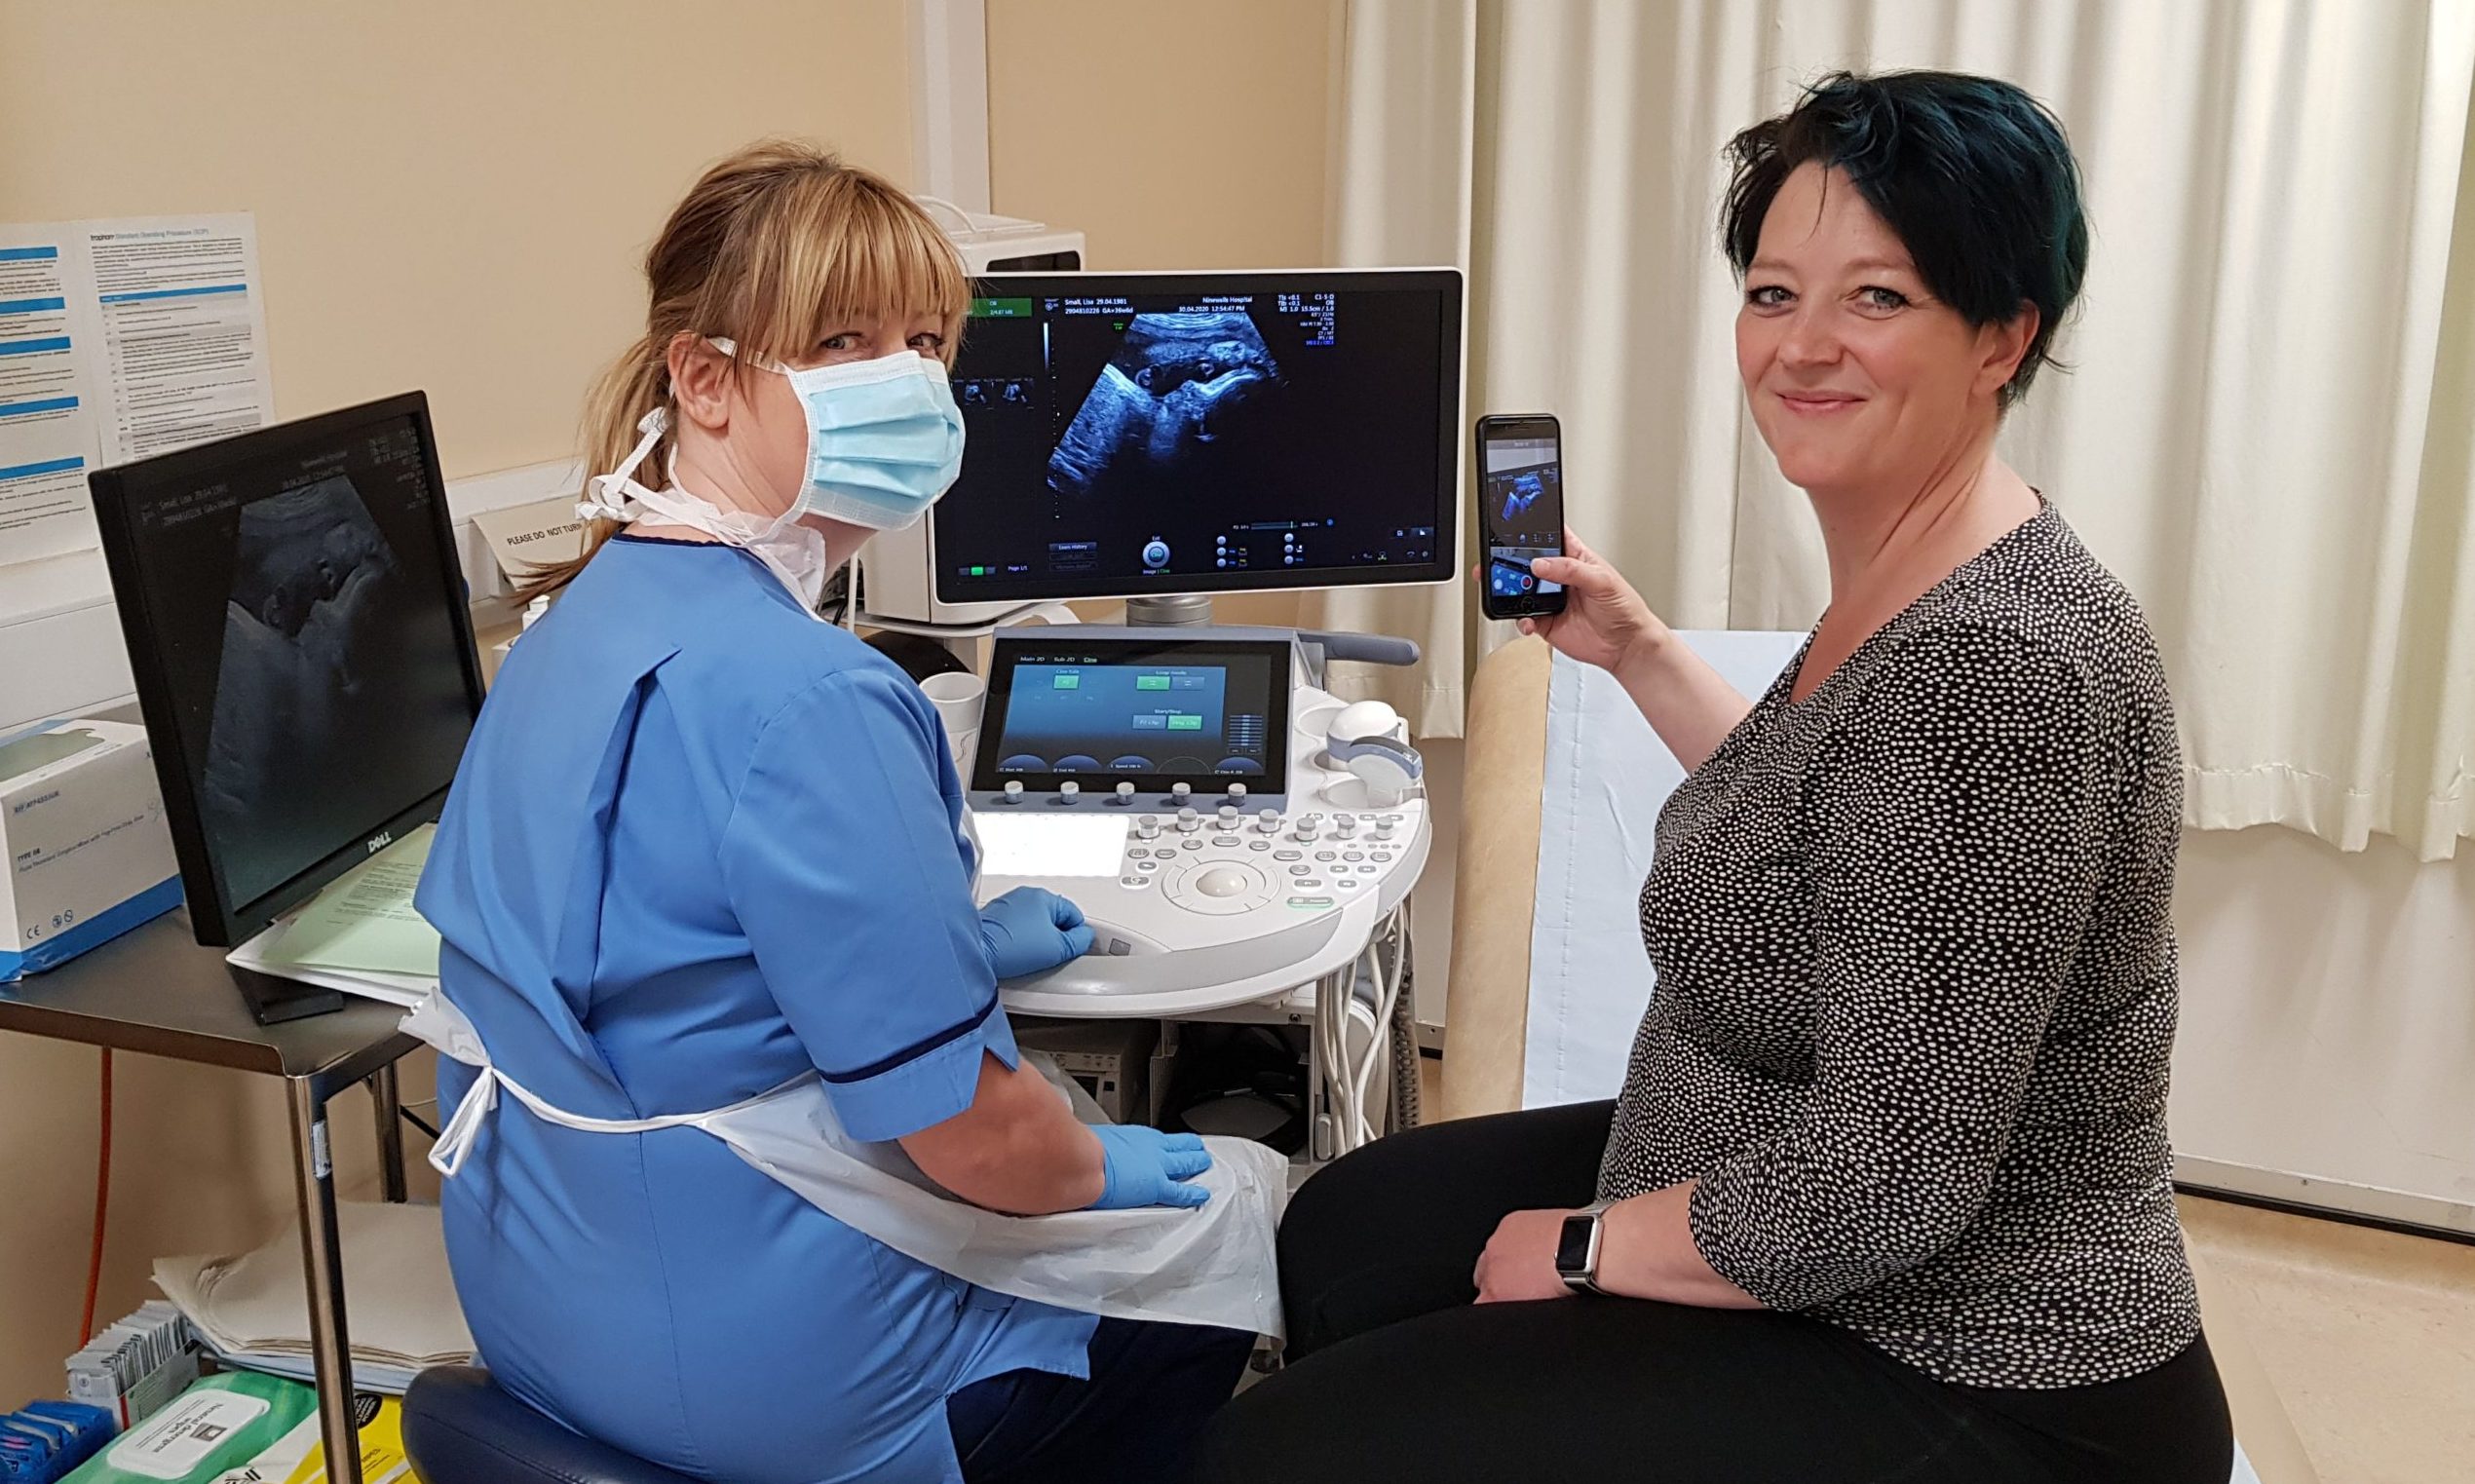 Midwife sonographer  Laura Coventry and mum-to-be Lisa Small with the scan of her baby.